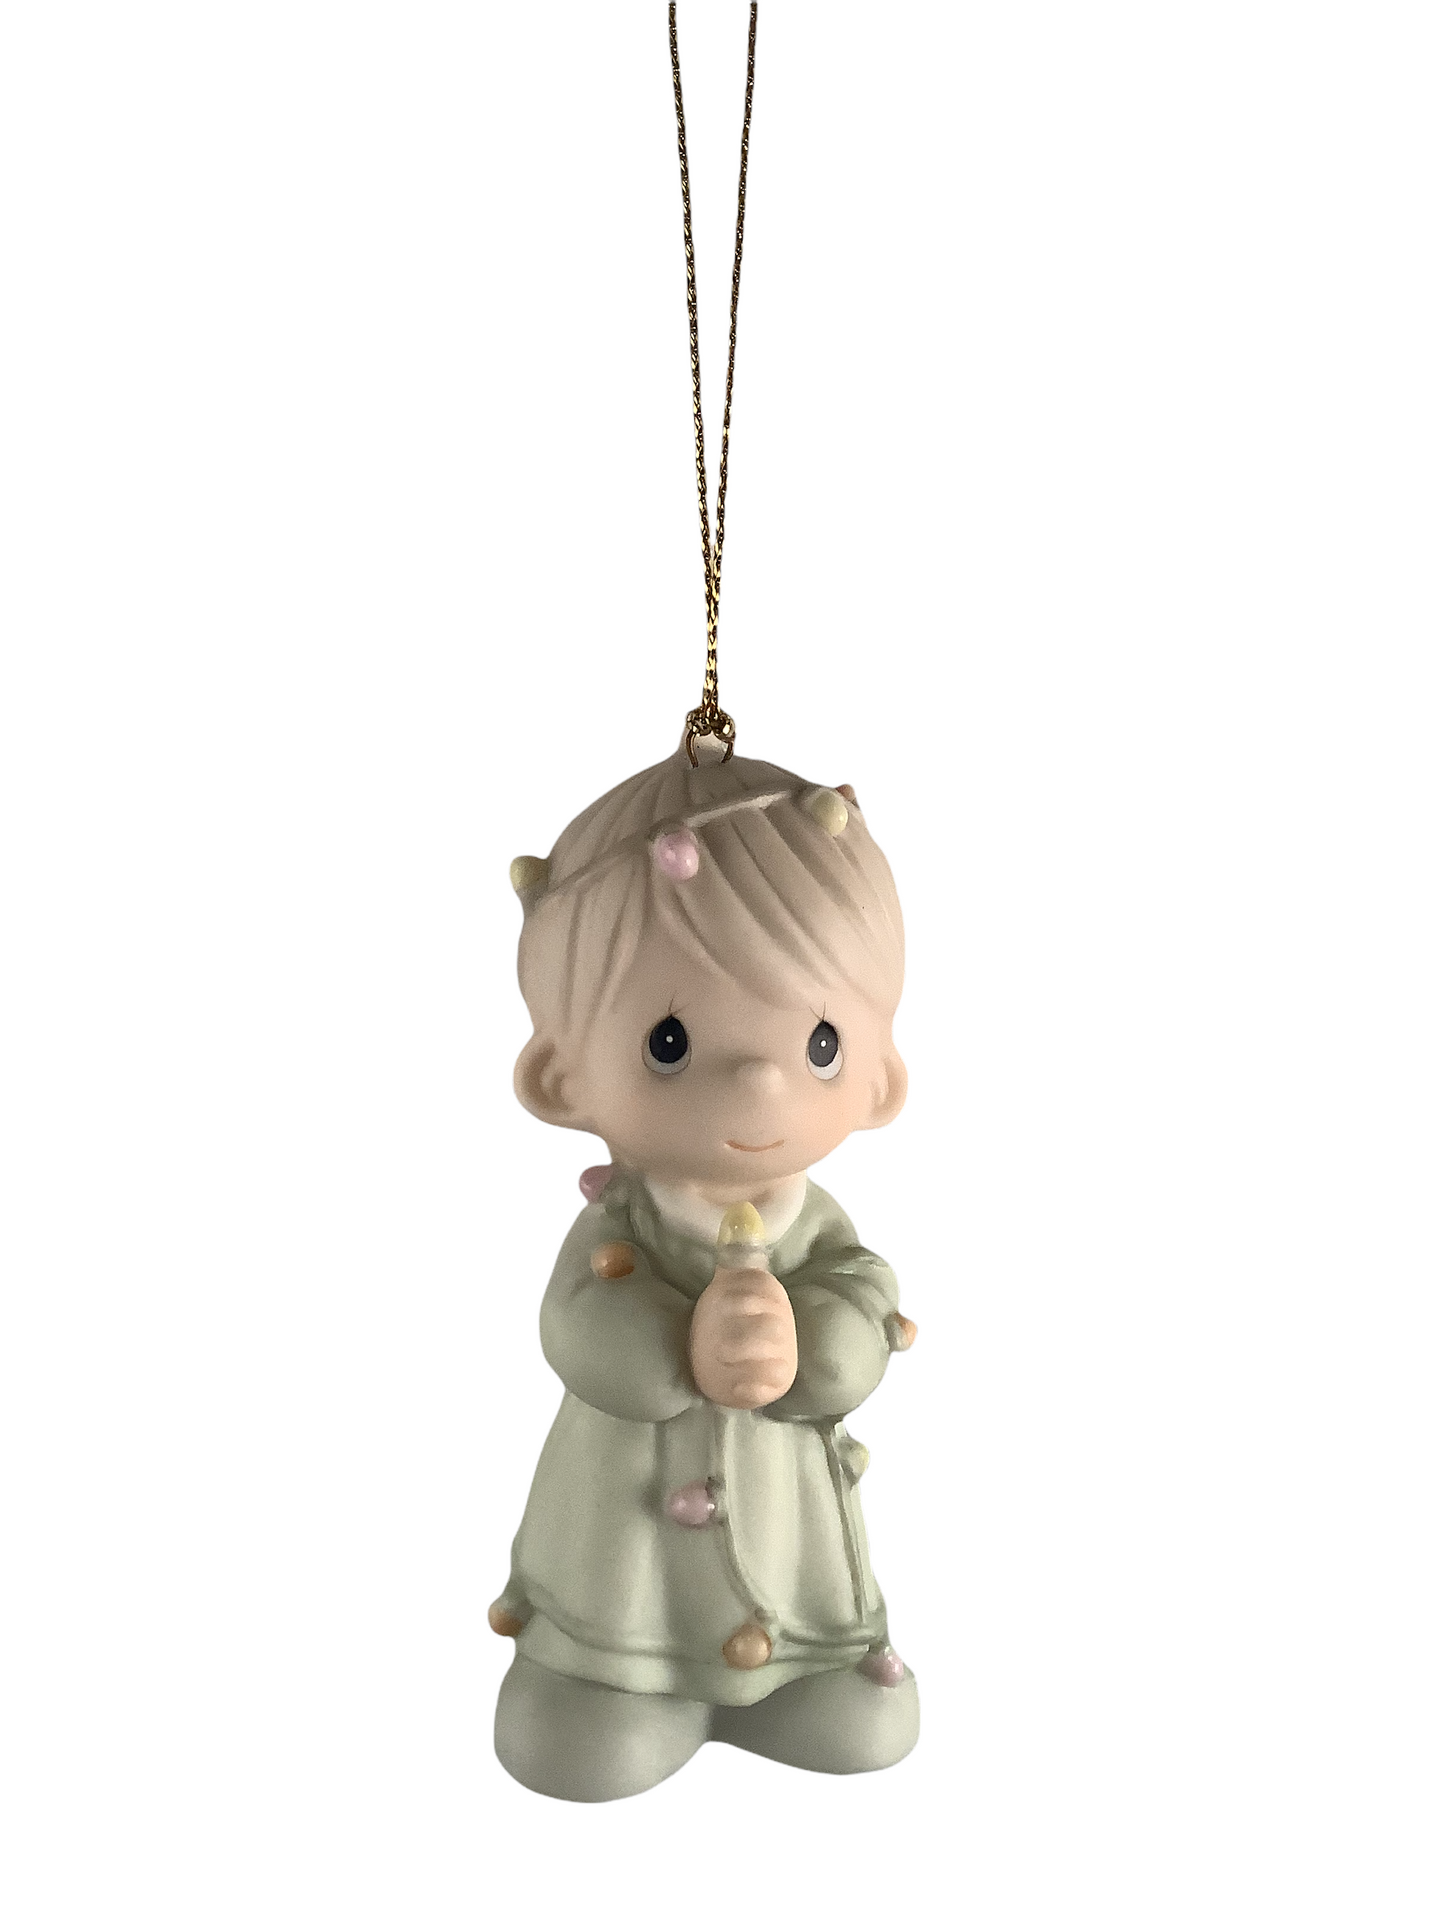 May Your Christmas Be Delightful - Precious Moment Ornament